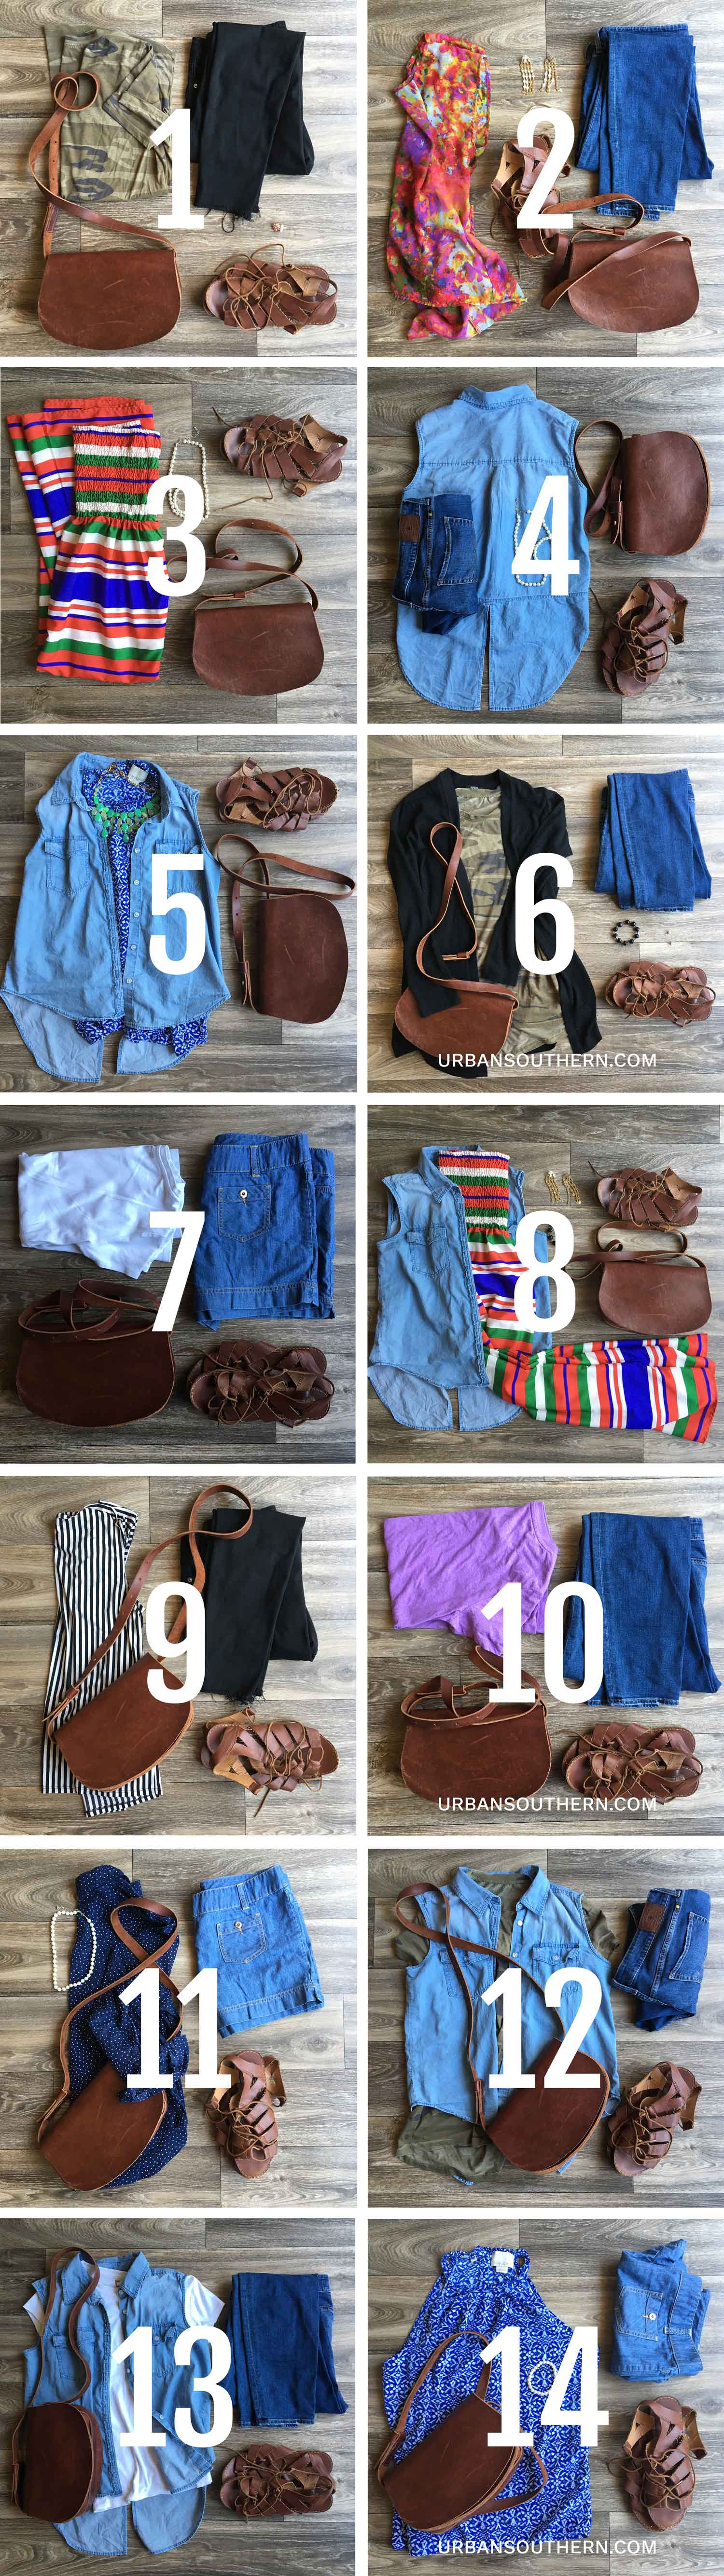 A Struggling Minimalist's Guide to Packing One Tote for Two Weeks of T –  Urban Southern